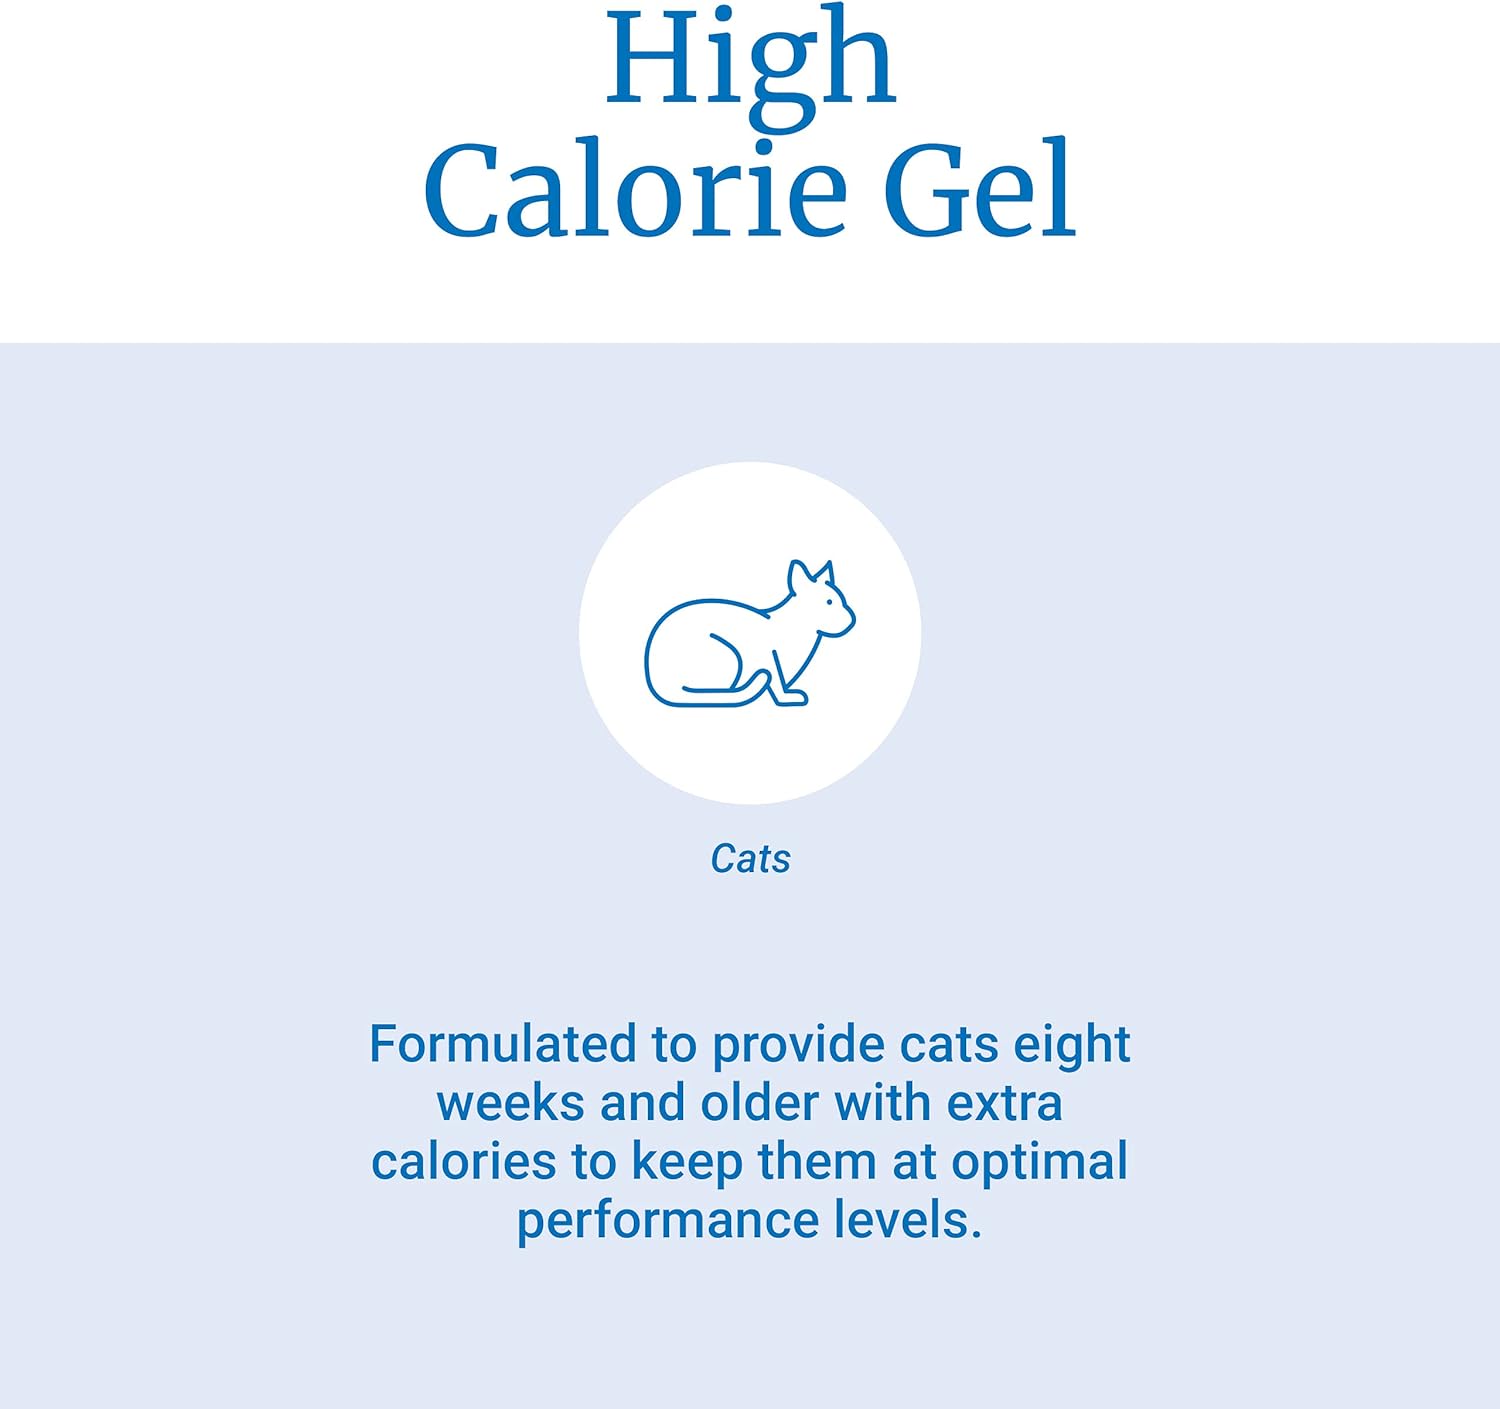 PetAg High Calorie Gel Supplement for Cats - Keep Cats at Op